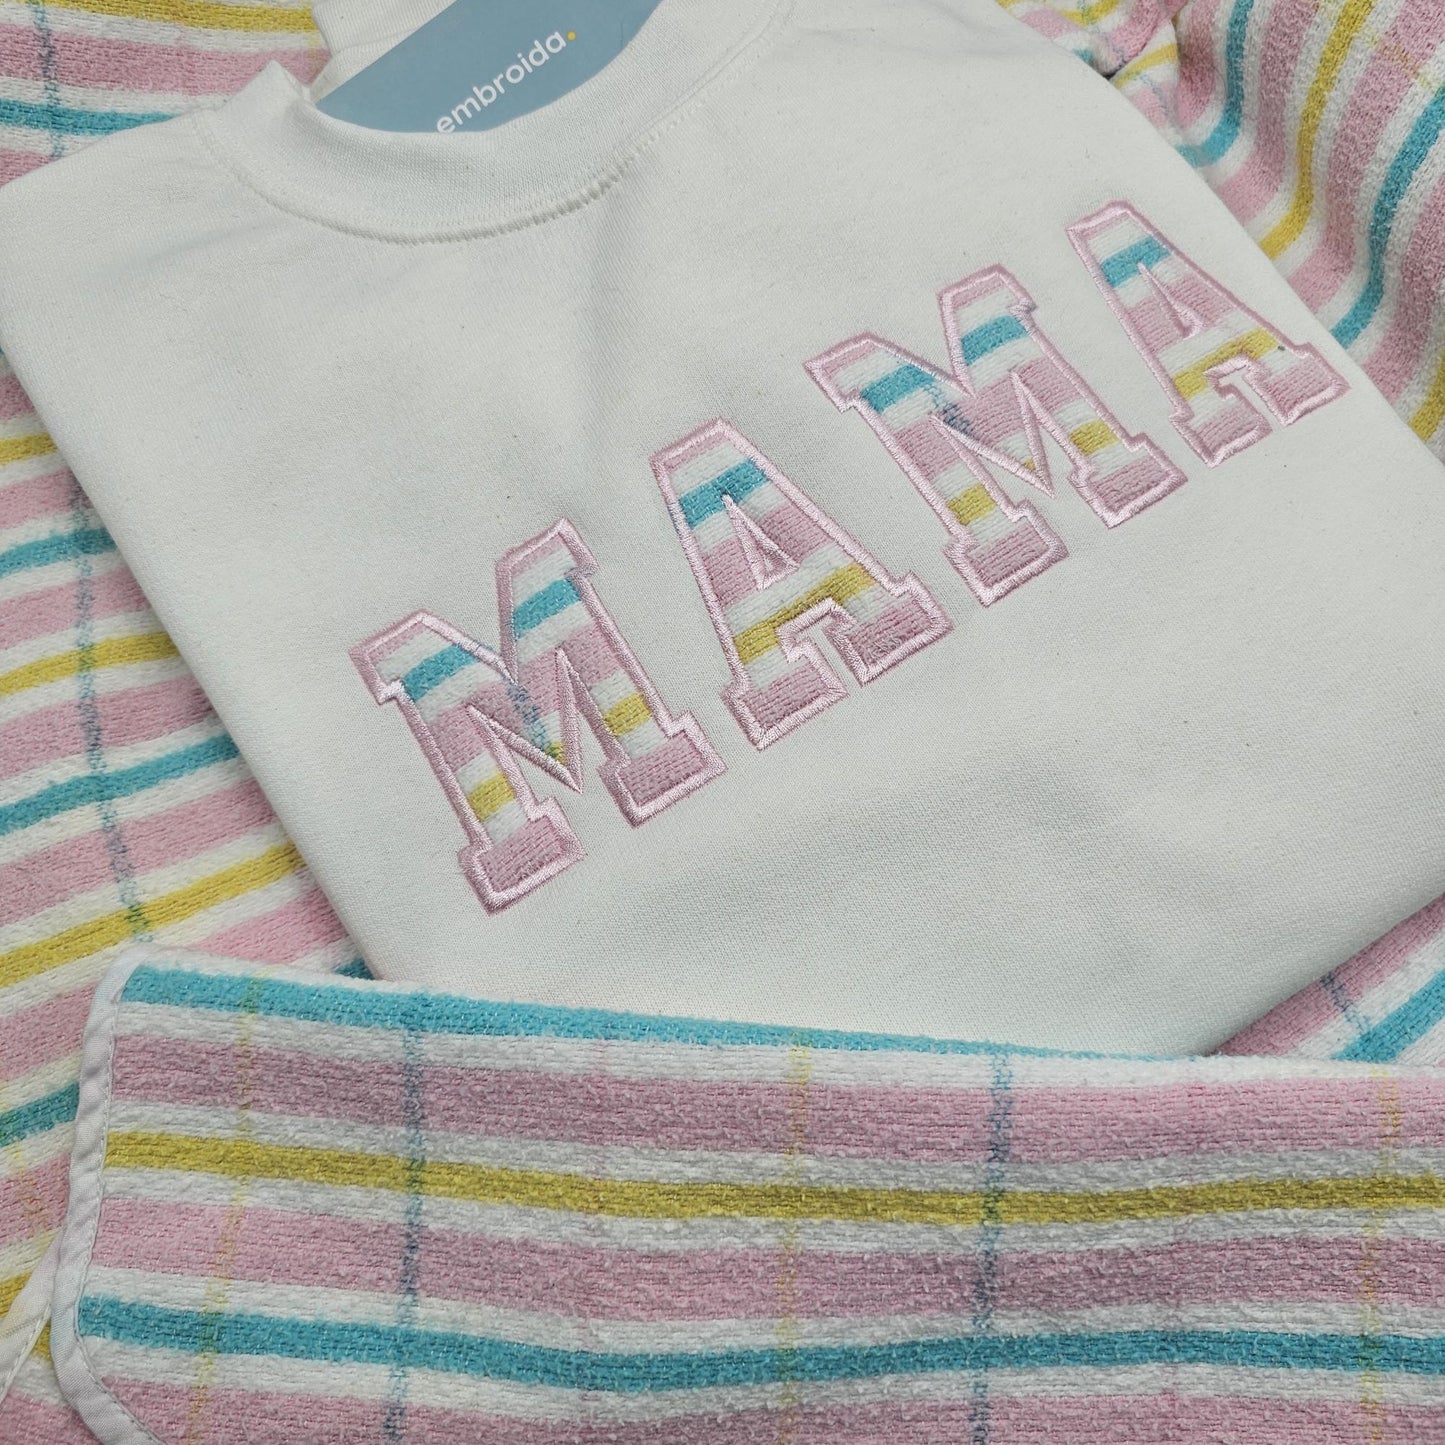 MAMA Memory Sweater made from babies clothing embroidered